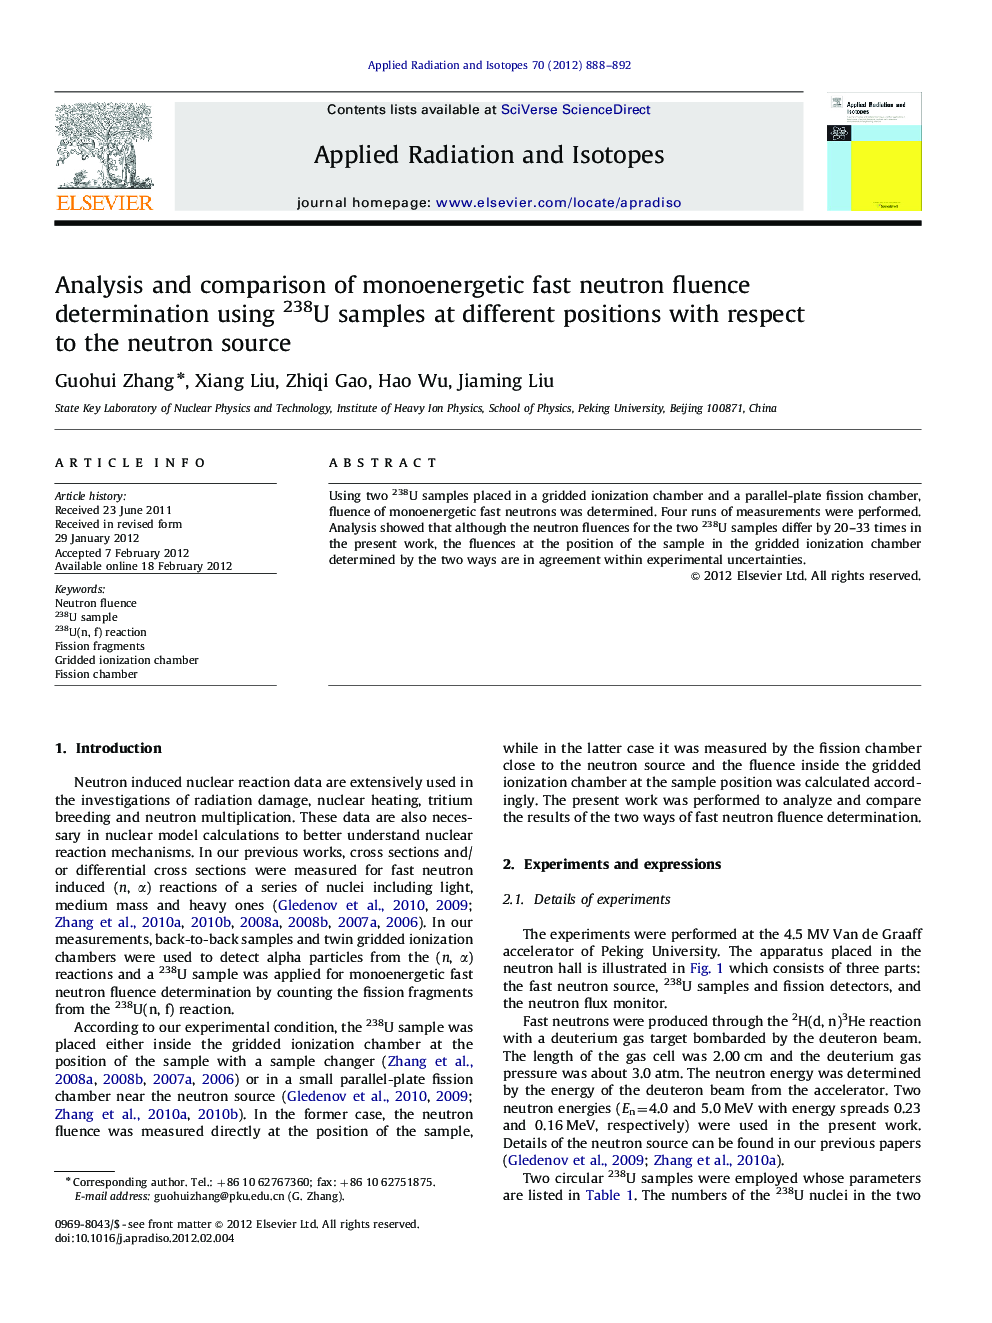 Analysis and comparison of monoenergetic fast neutron fluence determination using 238U samples at different positions with respect to the neutron source